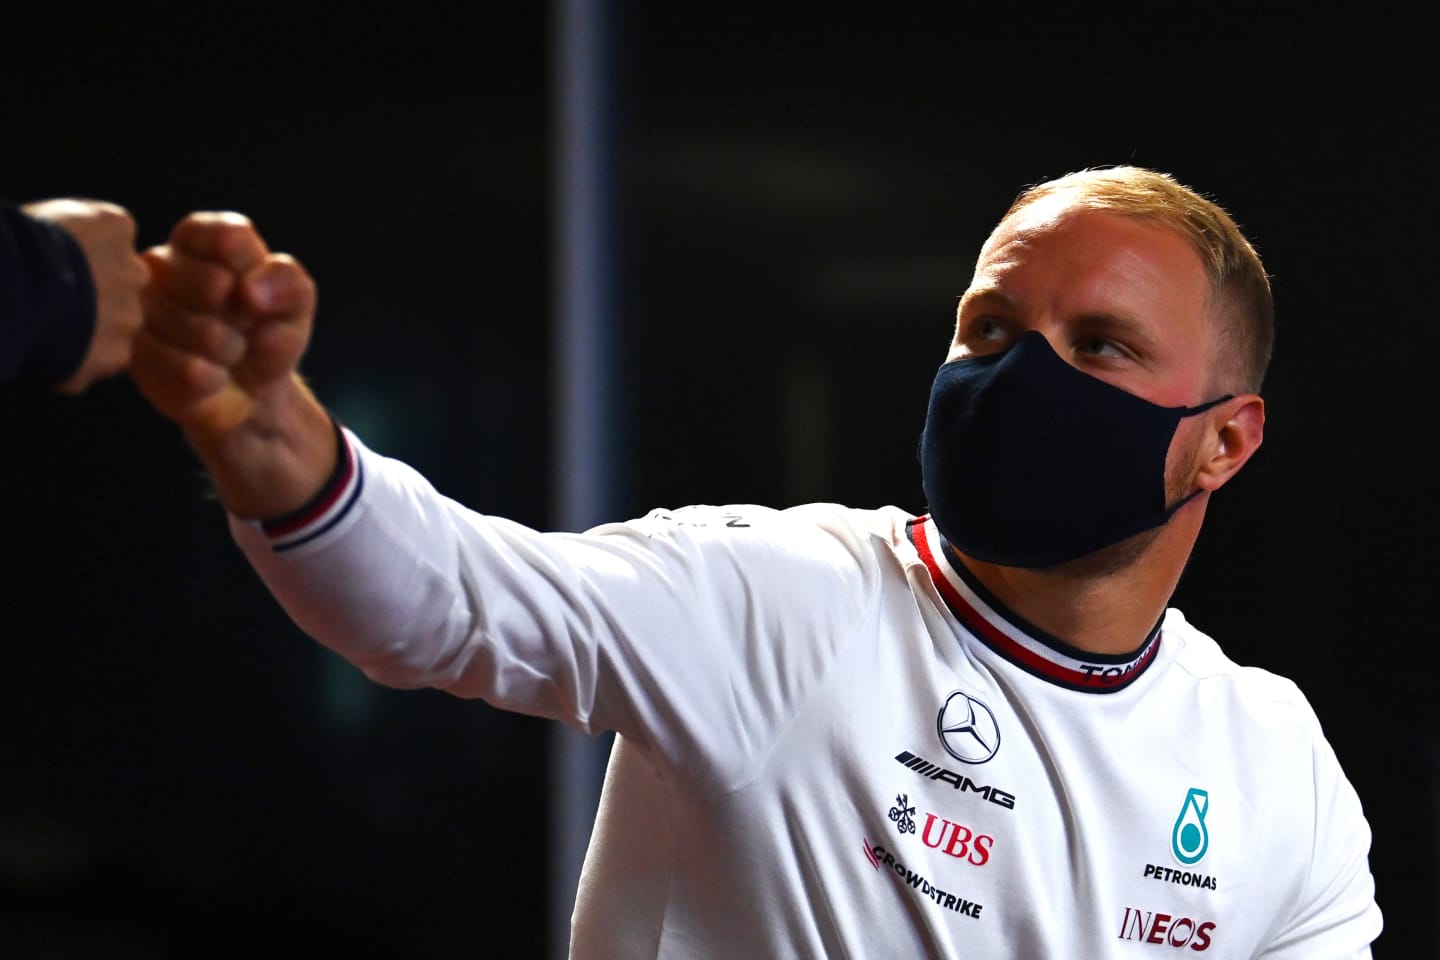 PORTIMAO, PORTUGAL - APRIL 29: Valtteri Bottas of Finland and Mercedes GP bumps fists in the